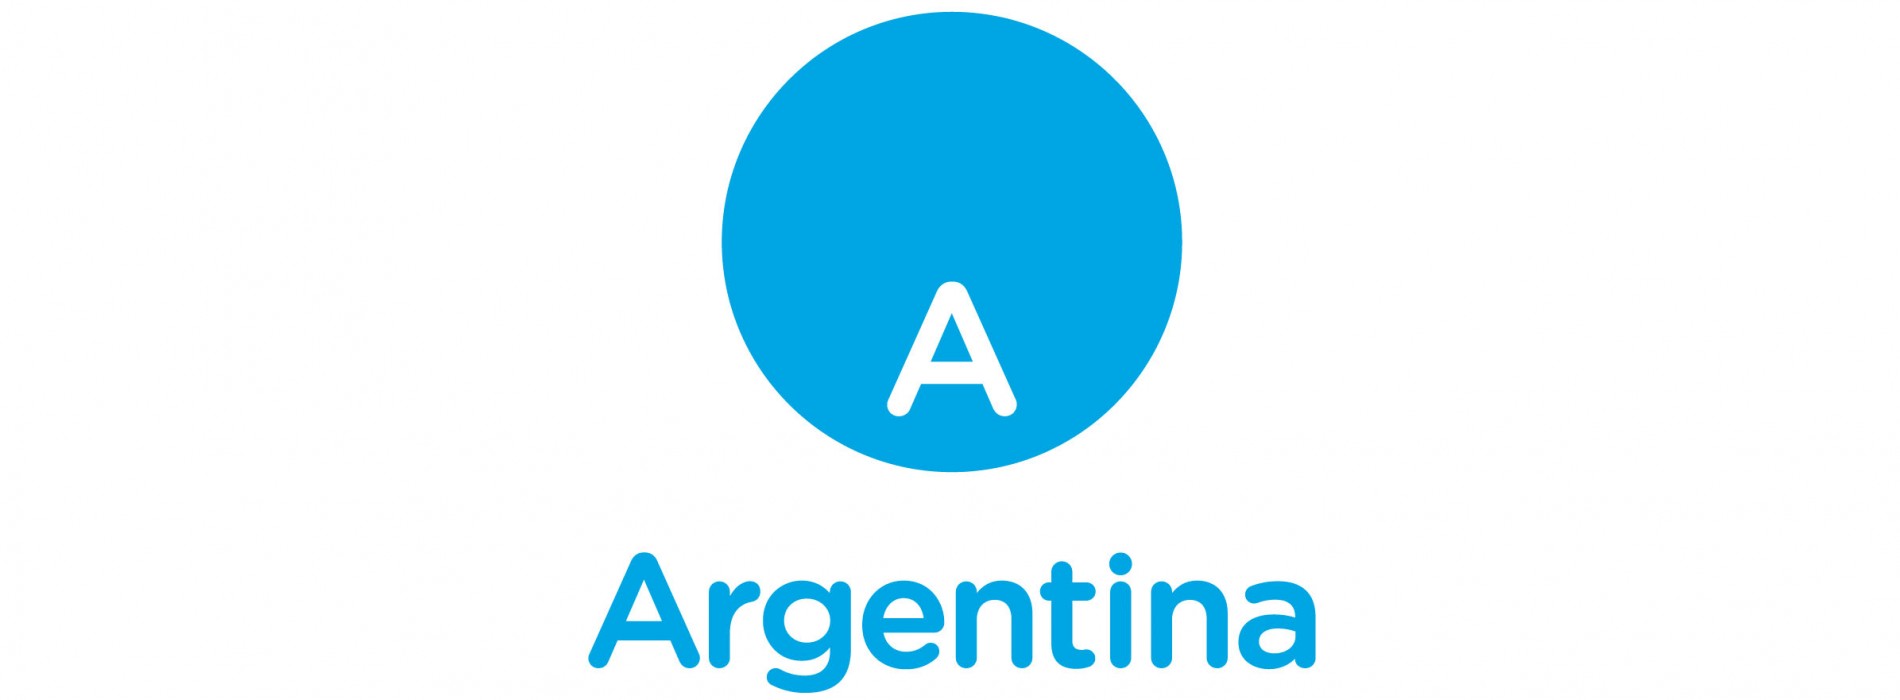 Argentina was presented in China to extend its advances in air connectivity